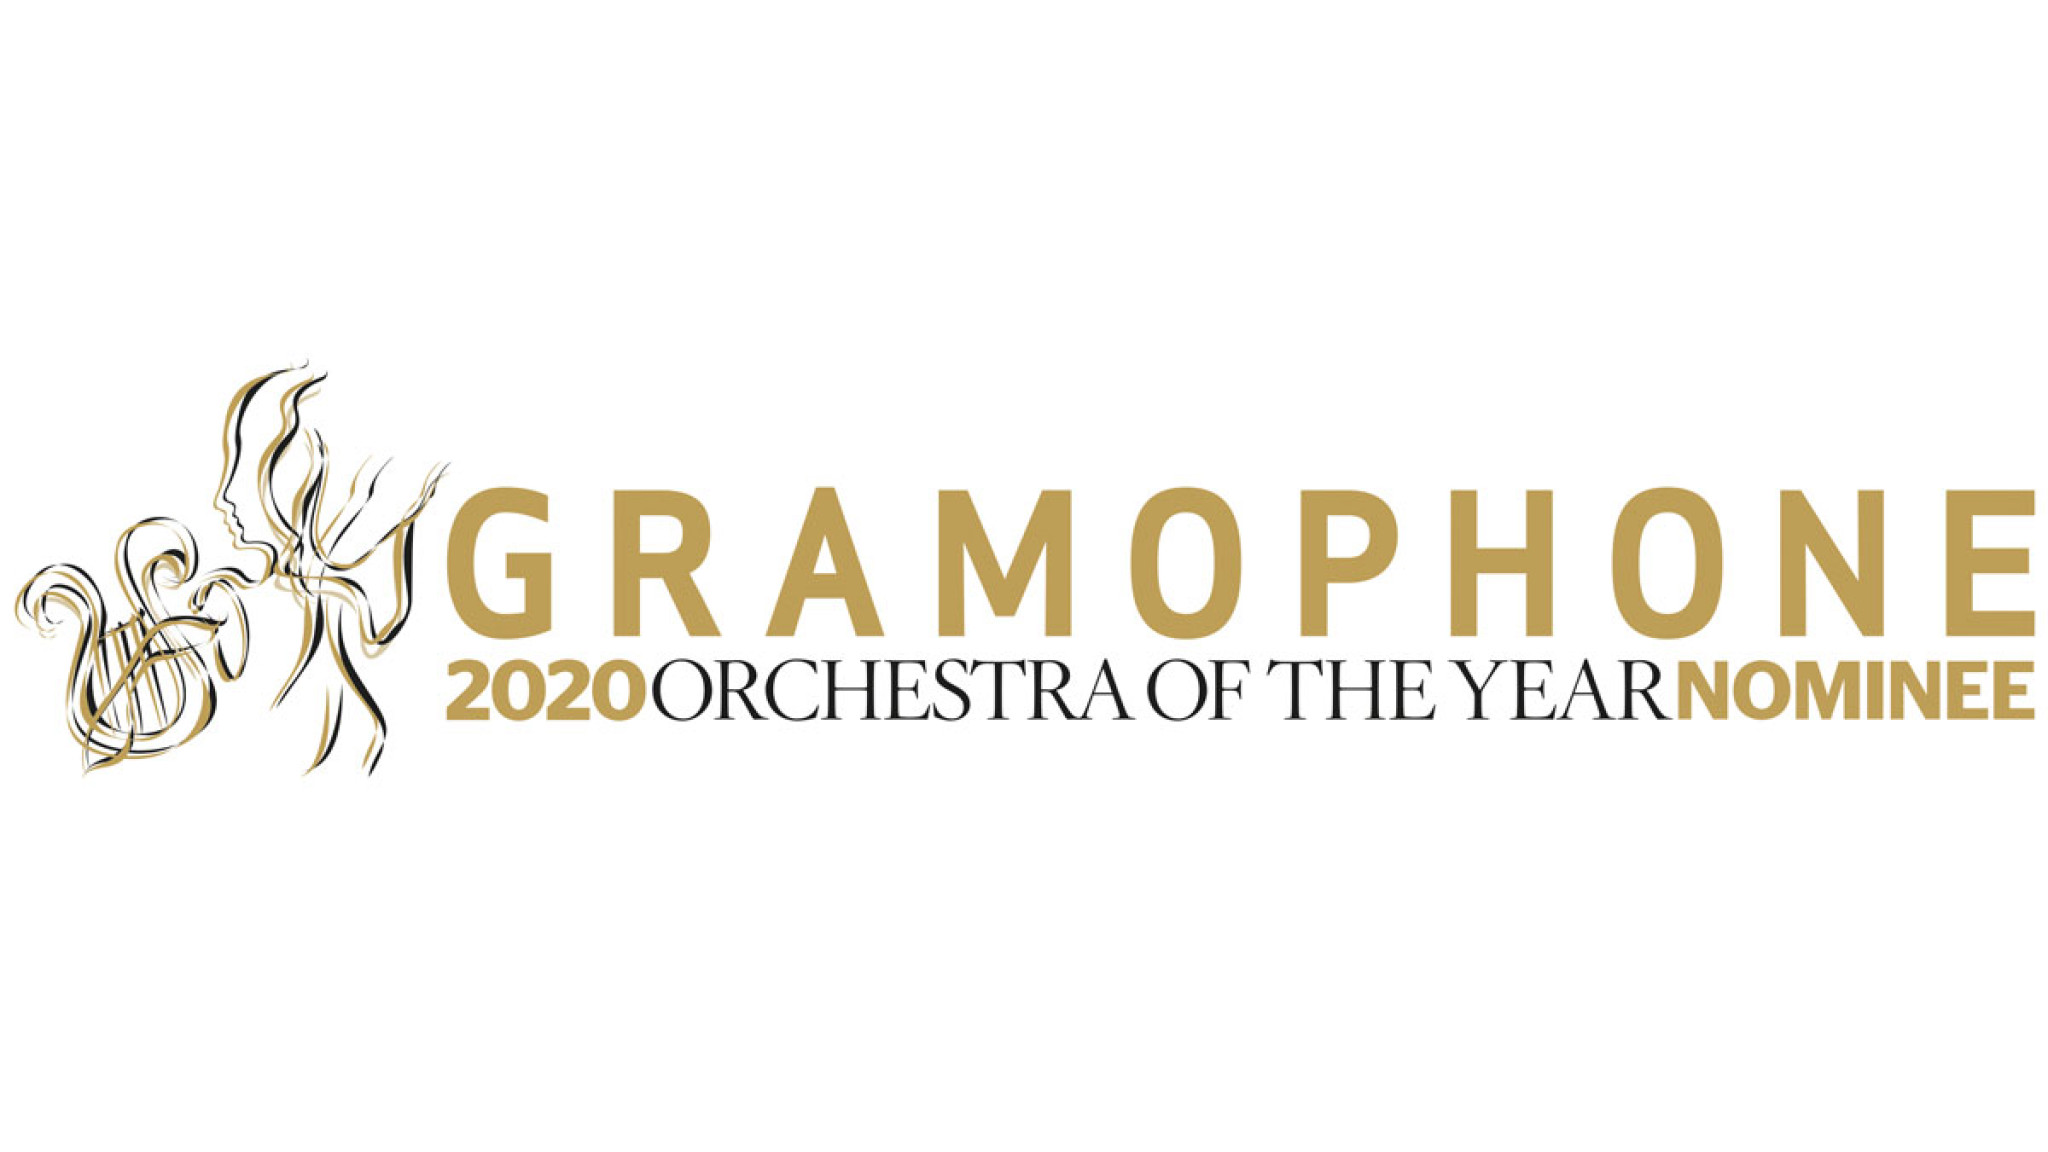 Gramophone 2020 Orchestra of the Year Nominee